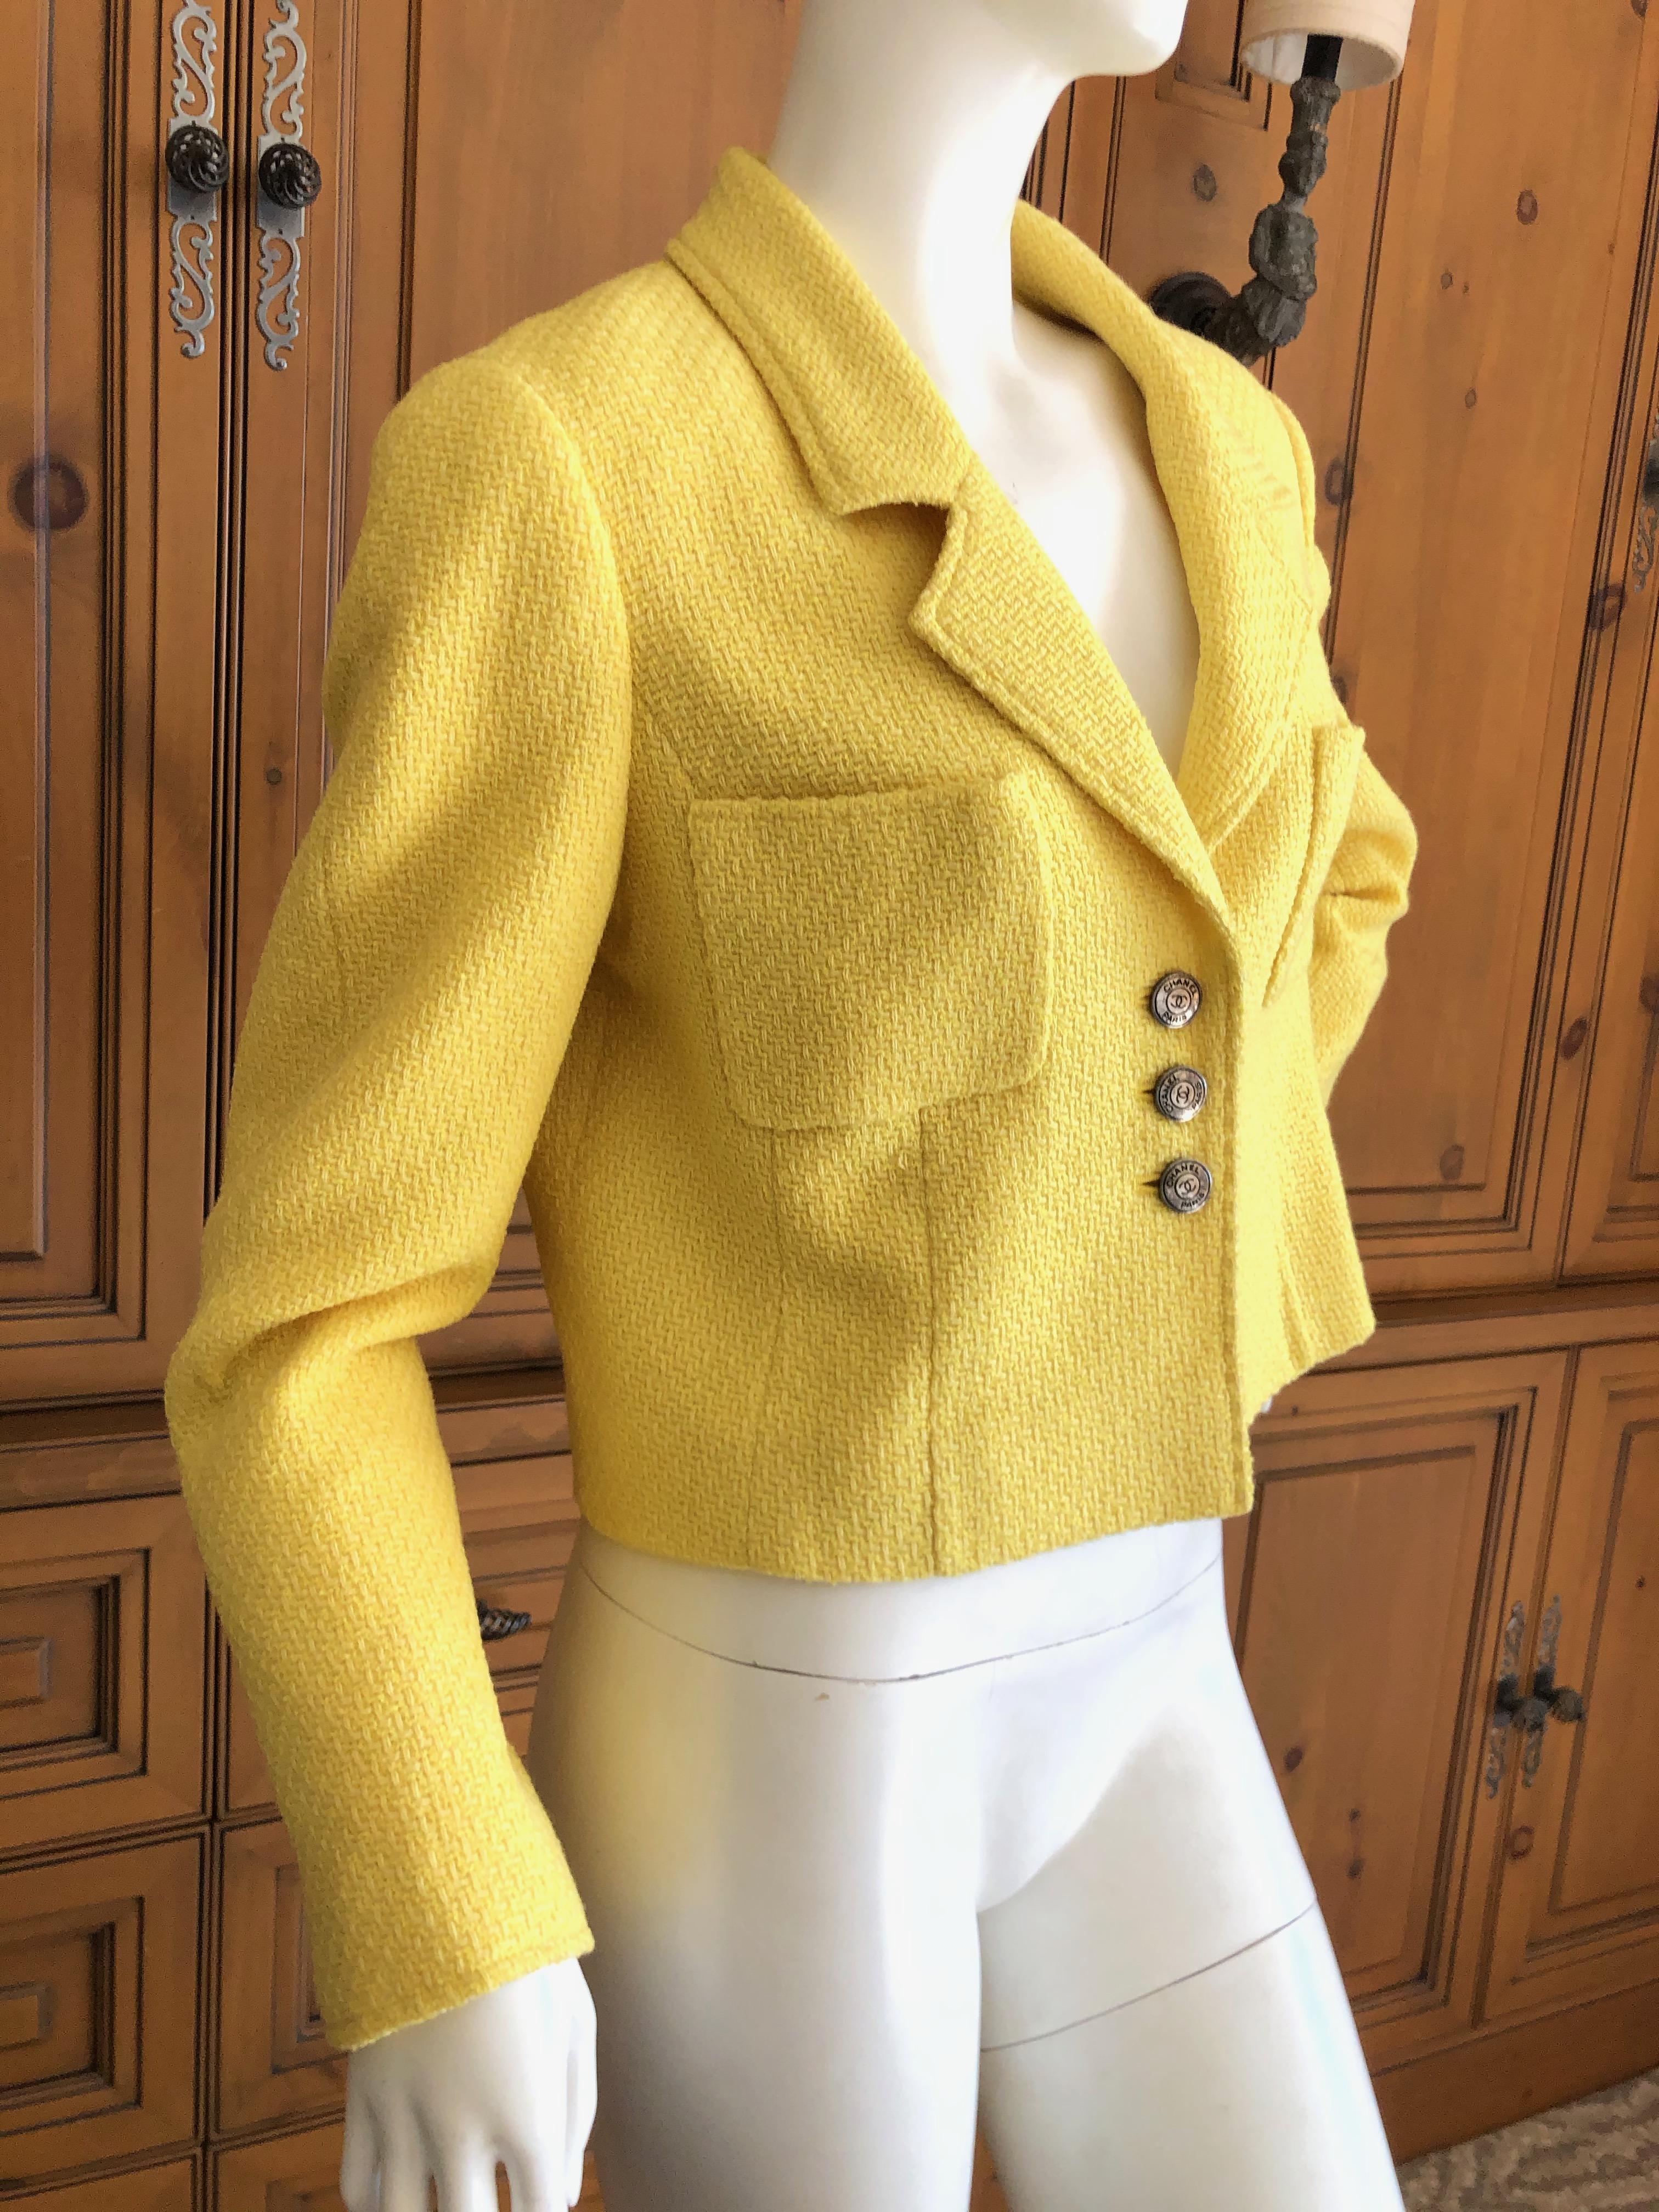 Chanel  Vintage Cropped Yellow Boucle Jacket w CC buttons and Chain Weighted Hem In Excellent Condition For Sale In Cloverdale, CA